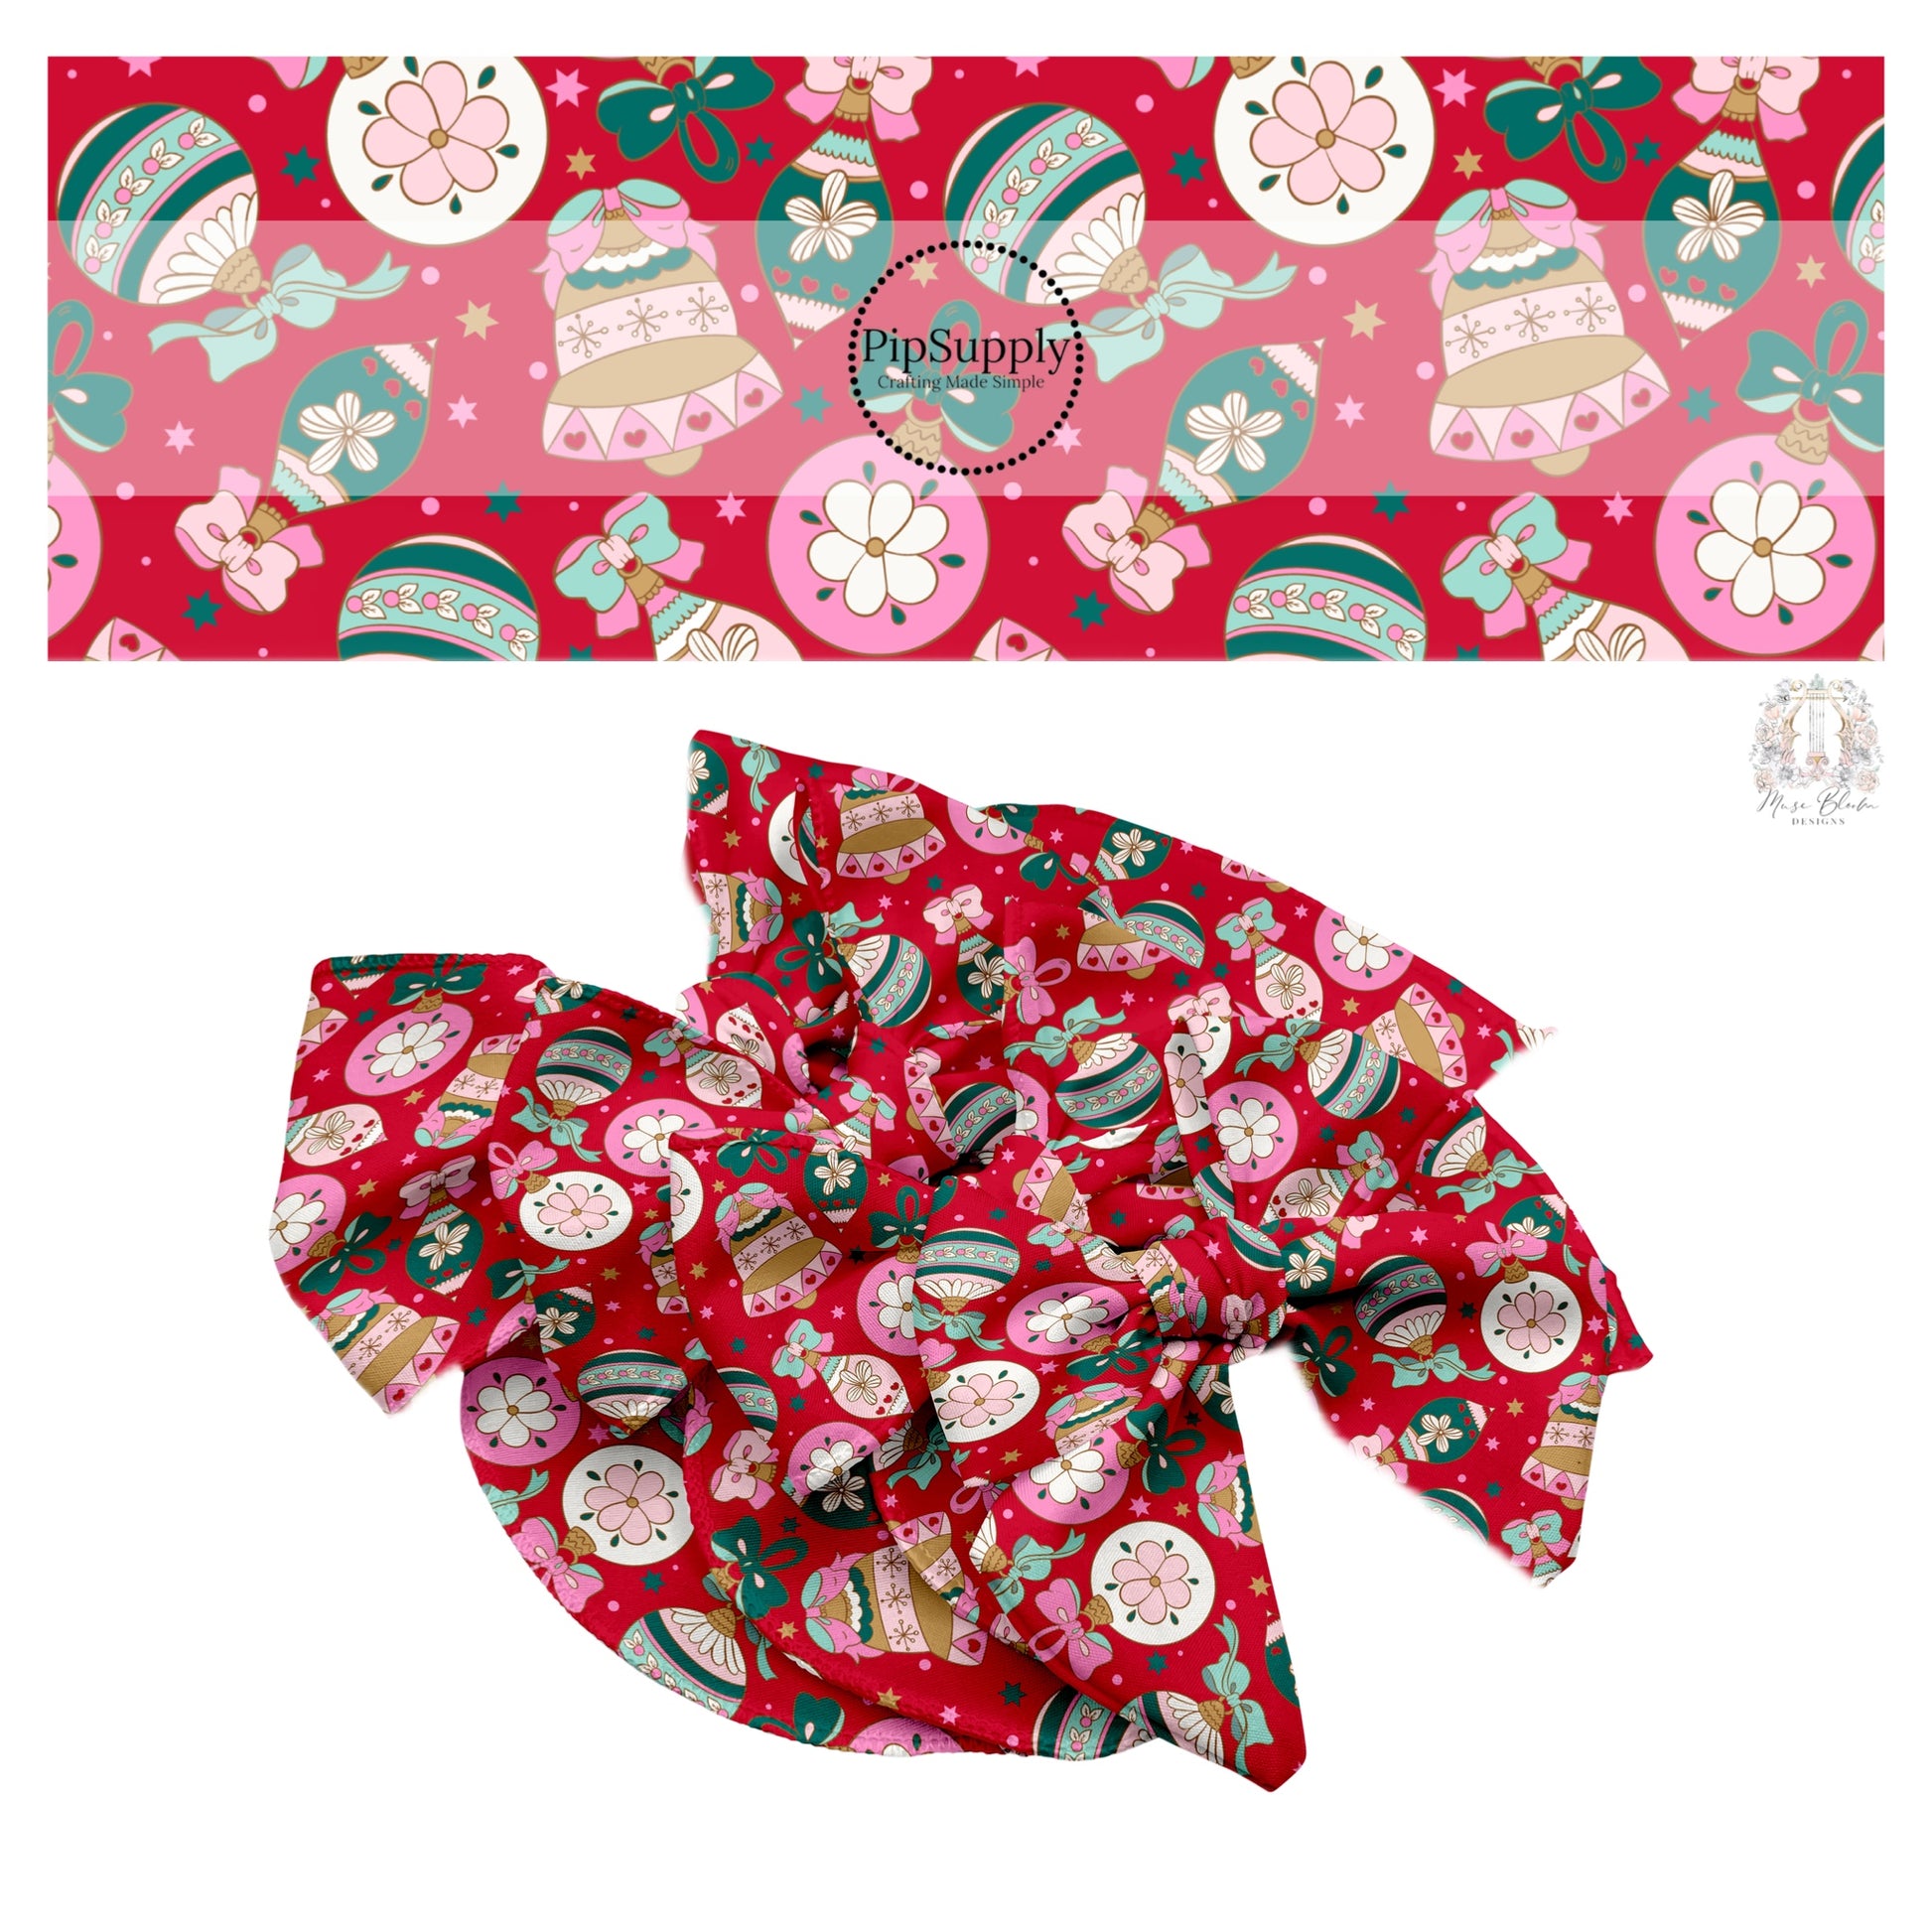 Multi vintage ornaments with stars on red hair bow strips